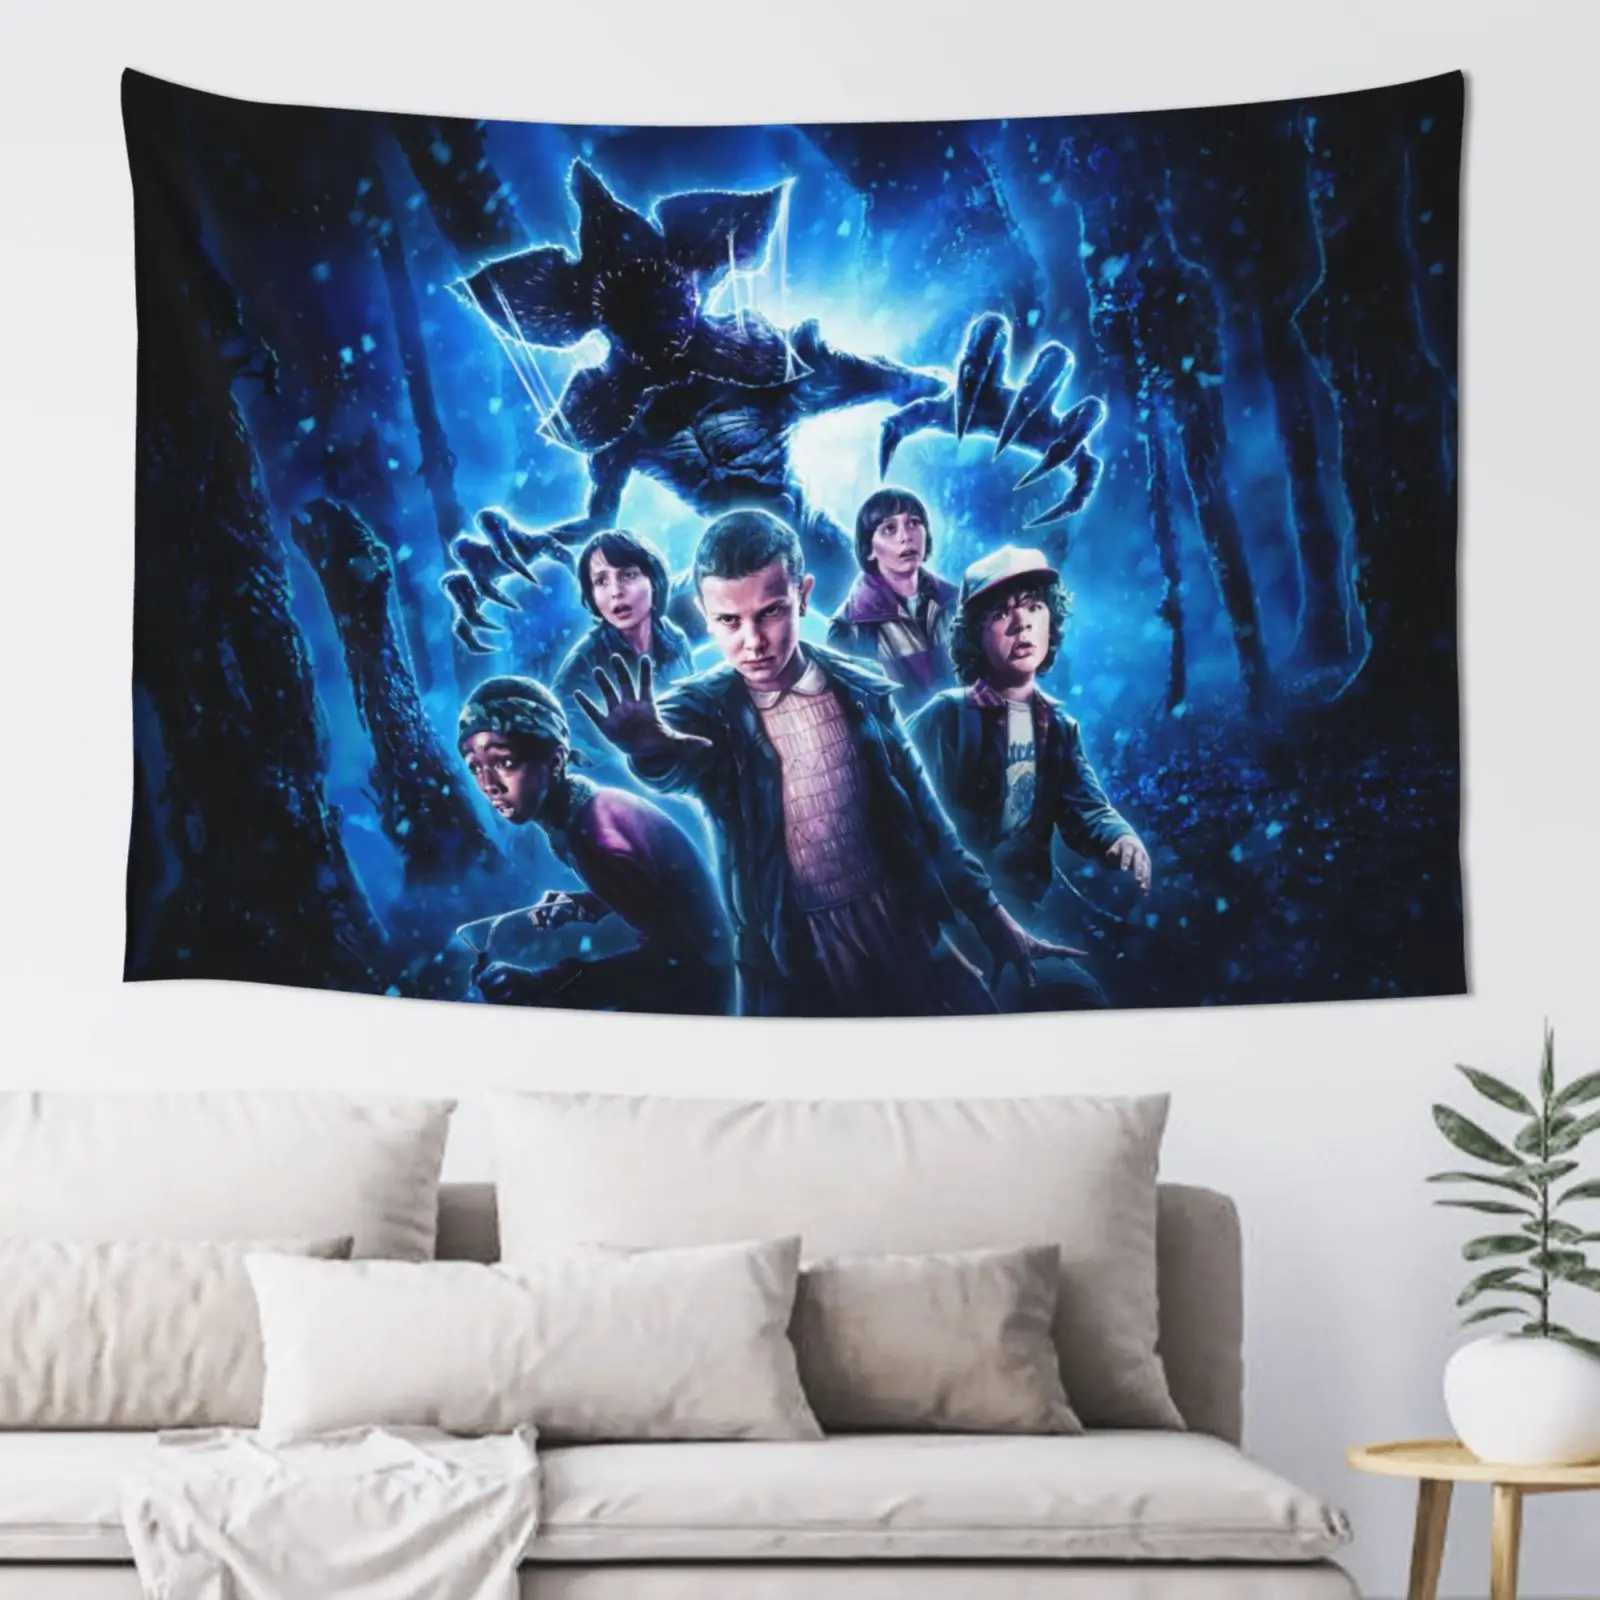 

2022 Hot New Show Stranger Things Season 4 To 1 Poster Home Decor Study Bedroom Kids Room Wall Paintings